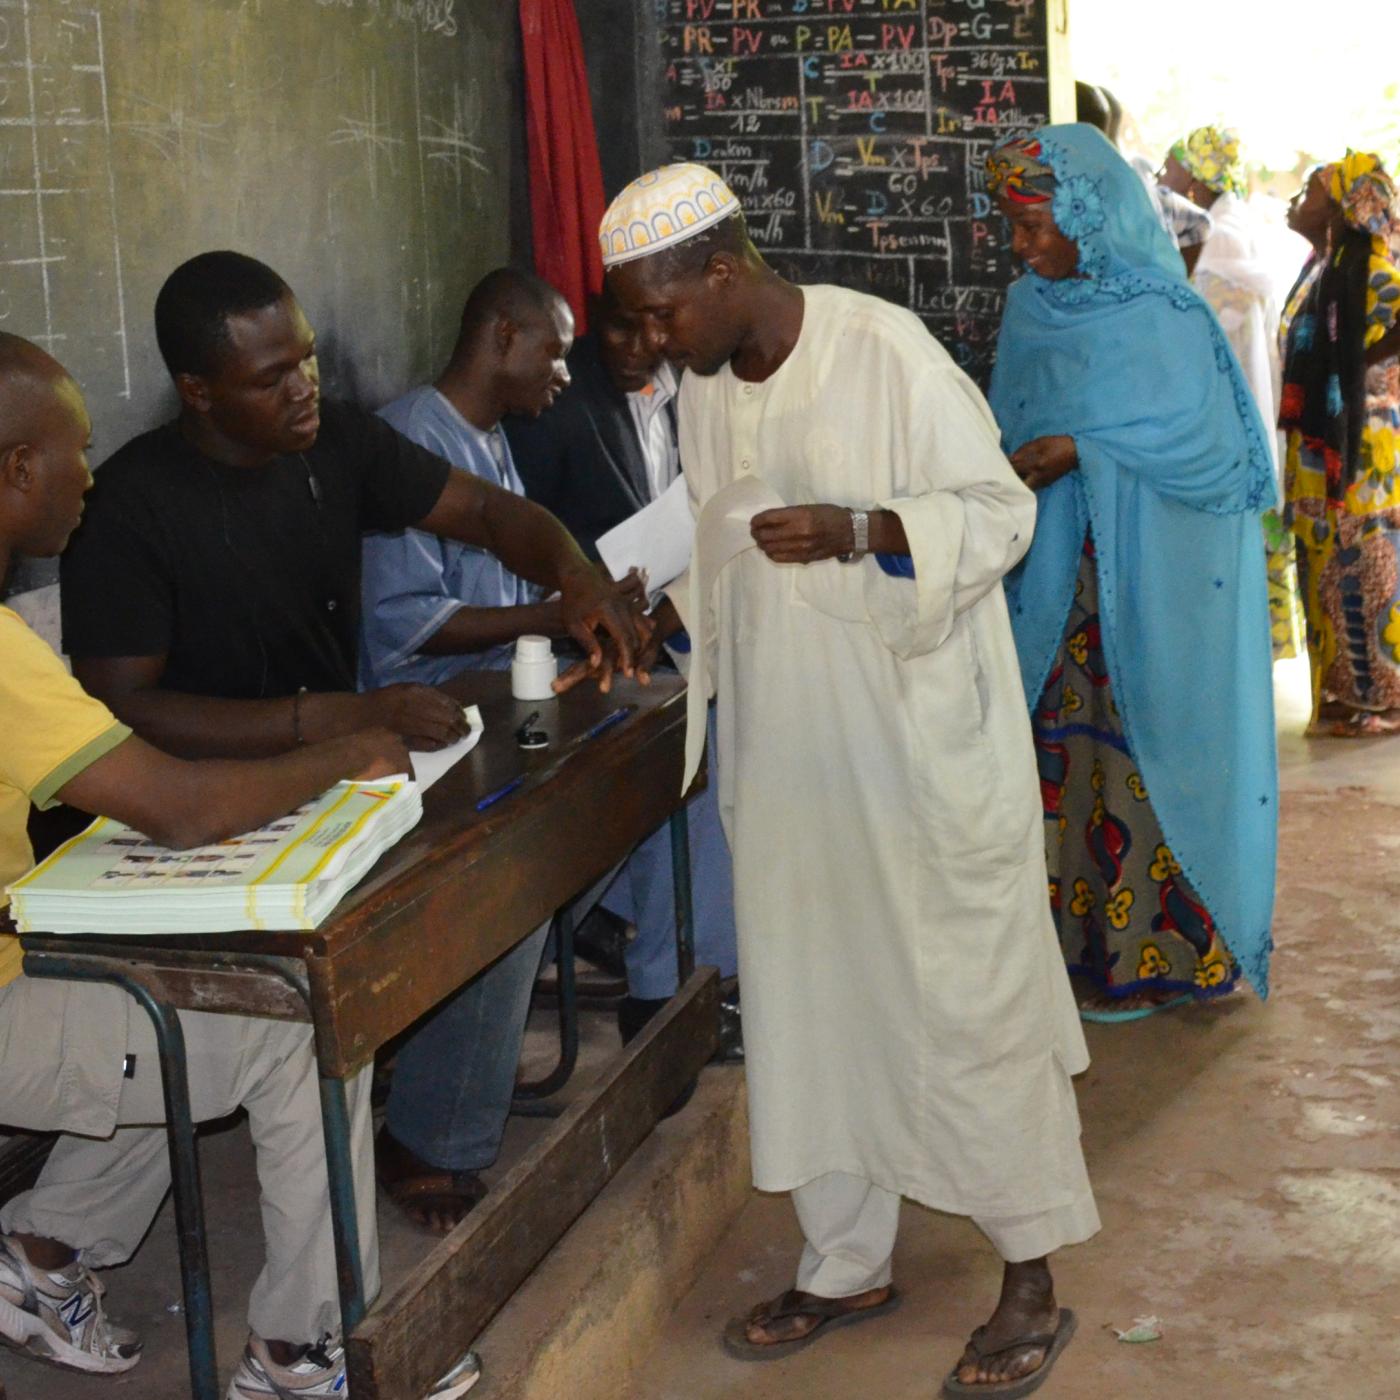 Voter getting inked in the 2013 presidential election in Mali 